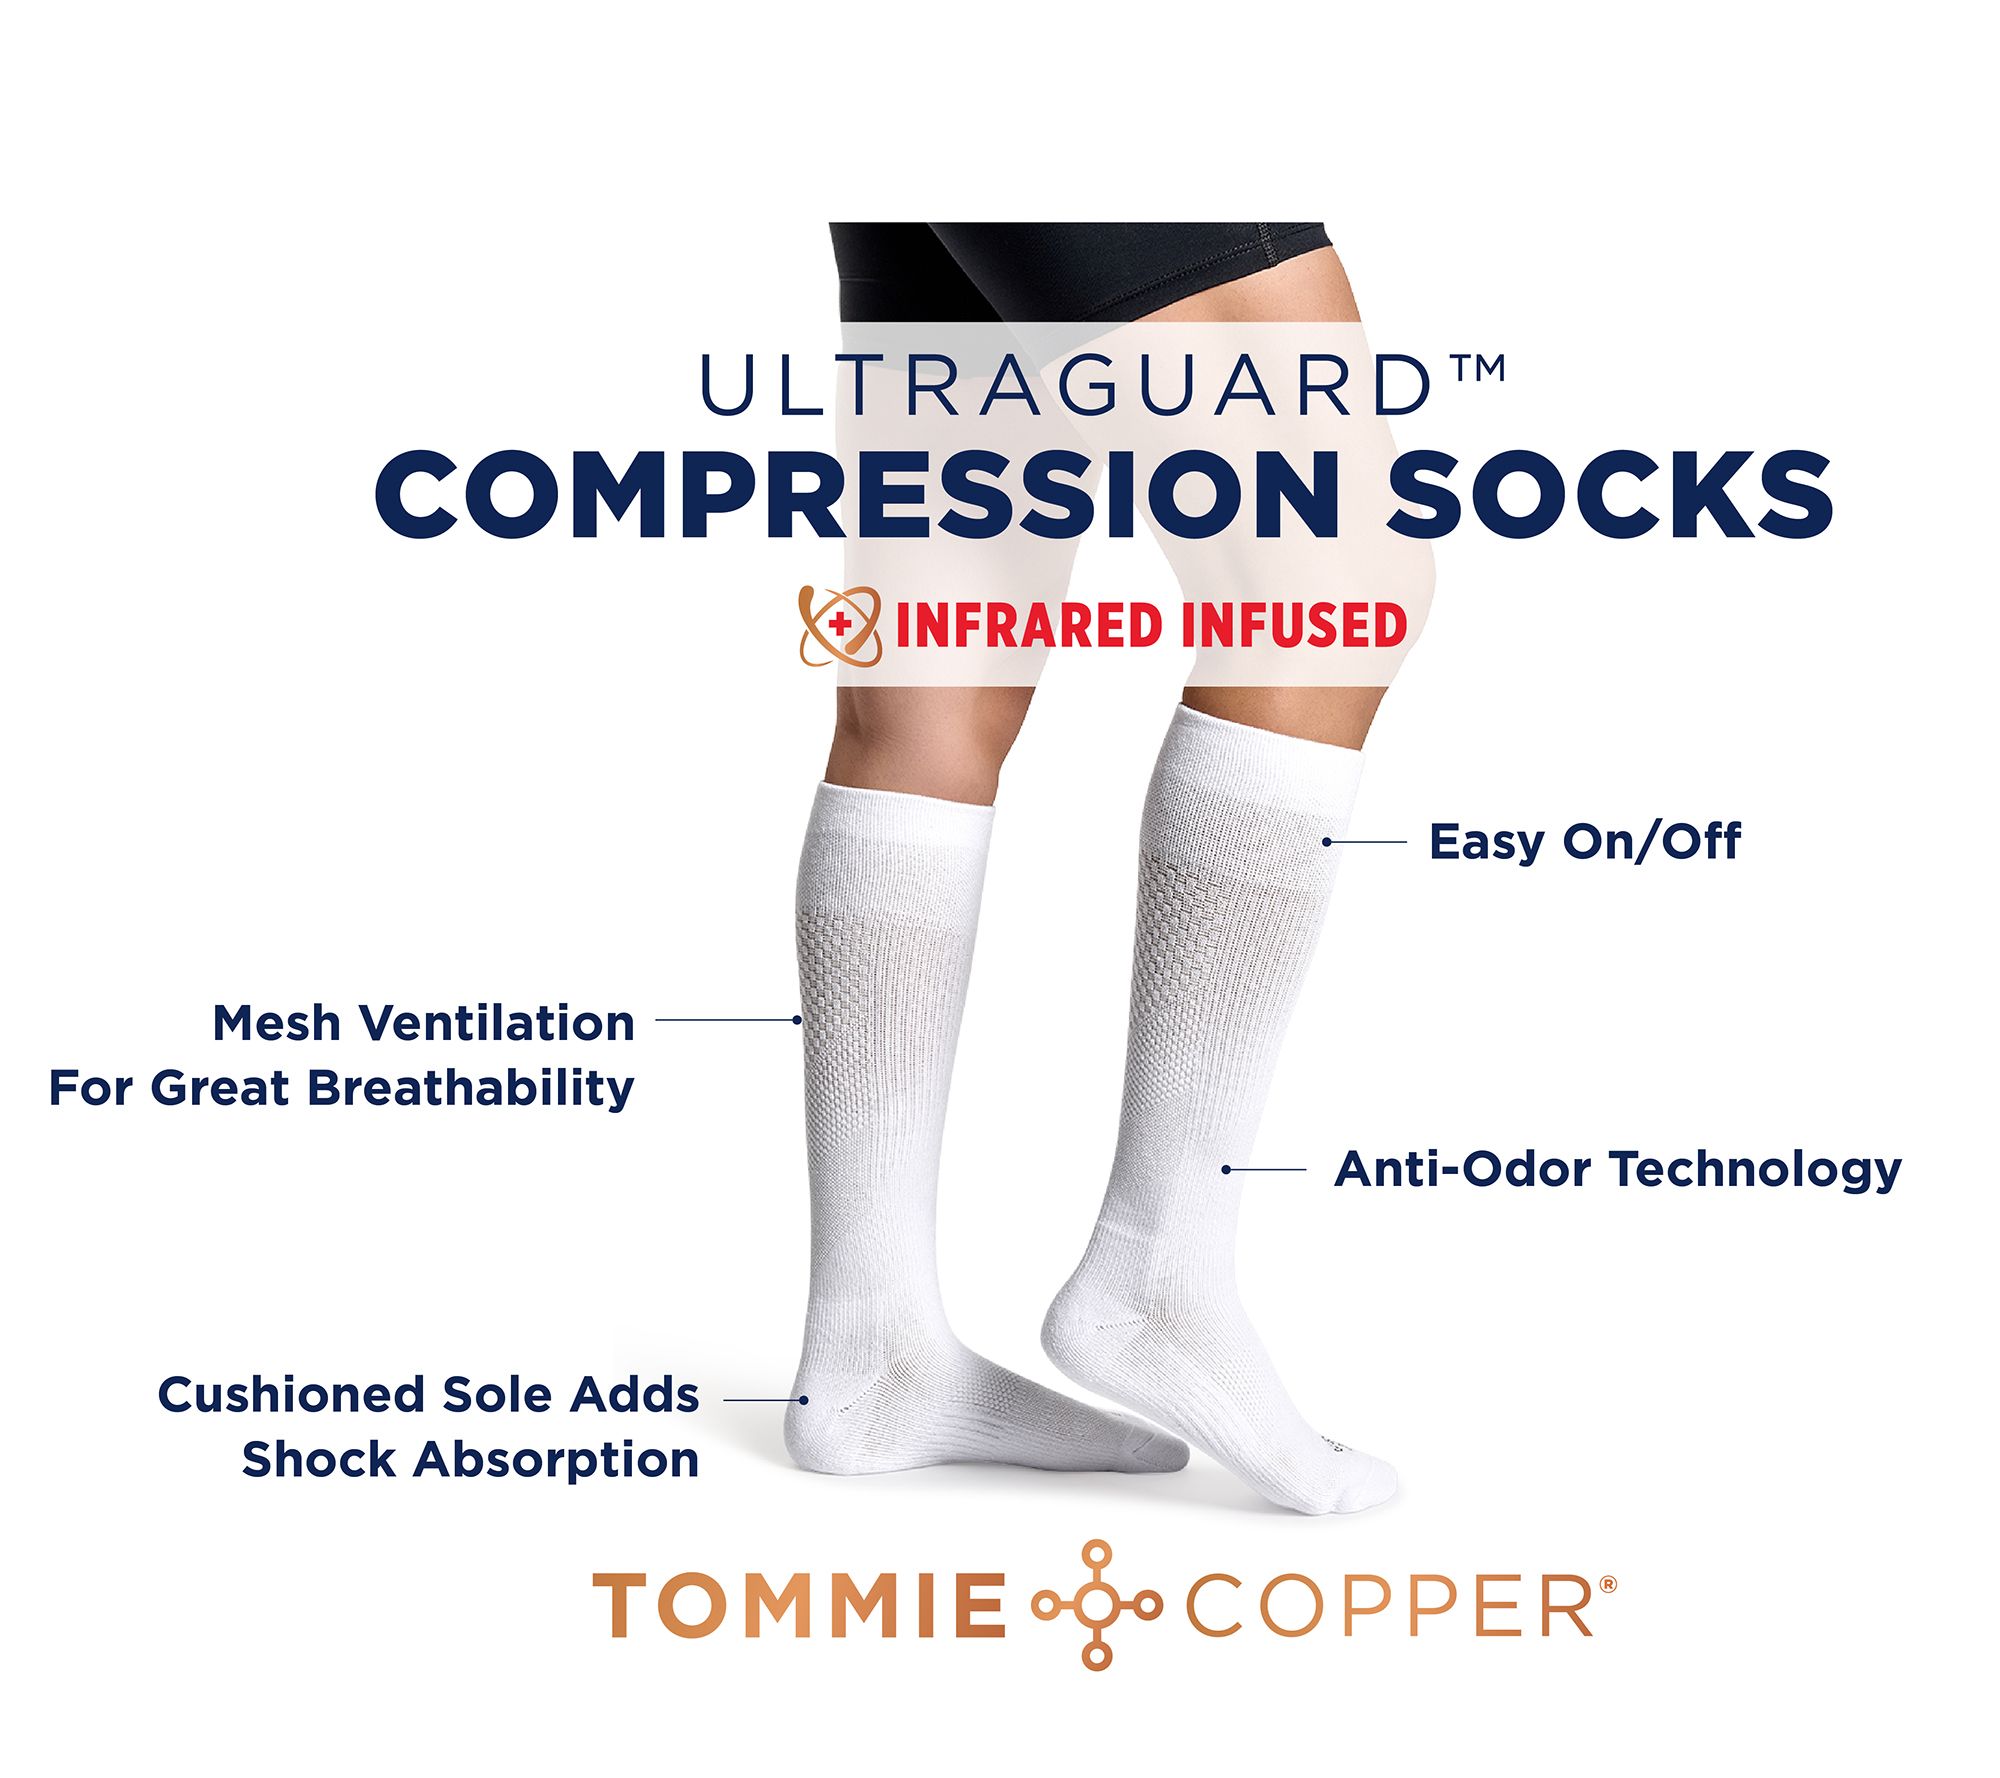 Tommie Copper S/4 Ultraguard Compression Socks with Infrared Tech - QVC.com